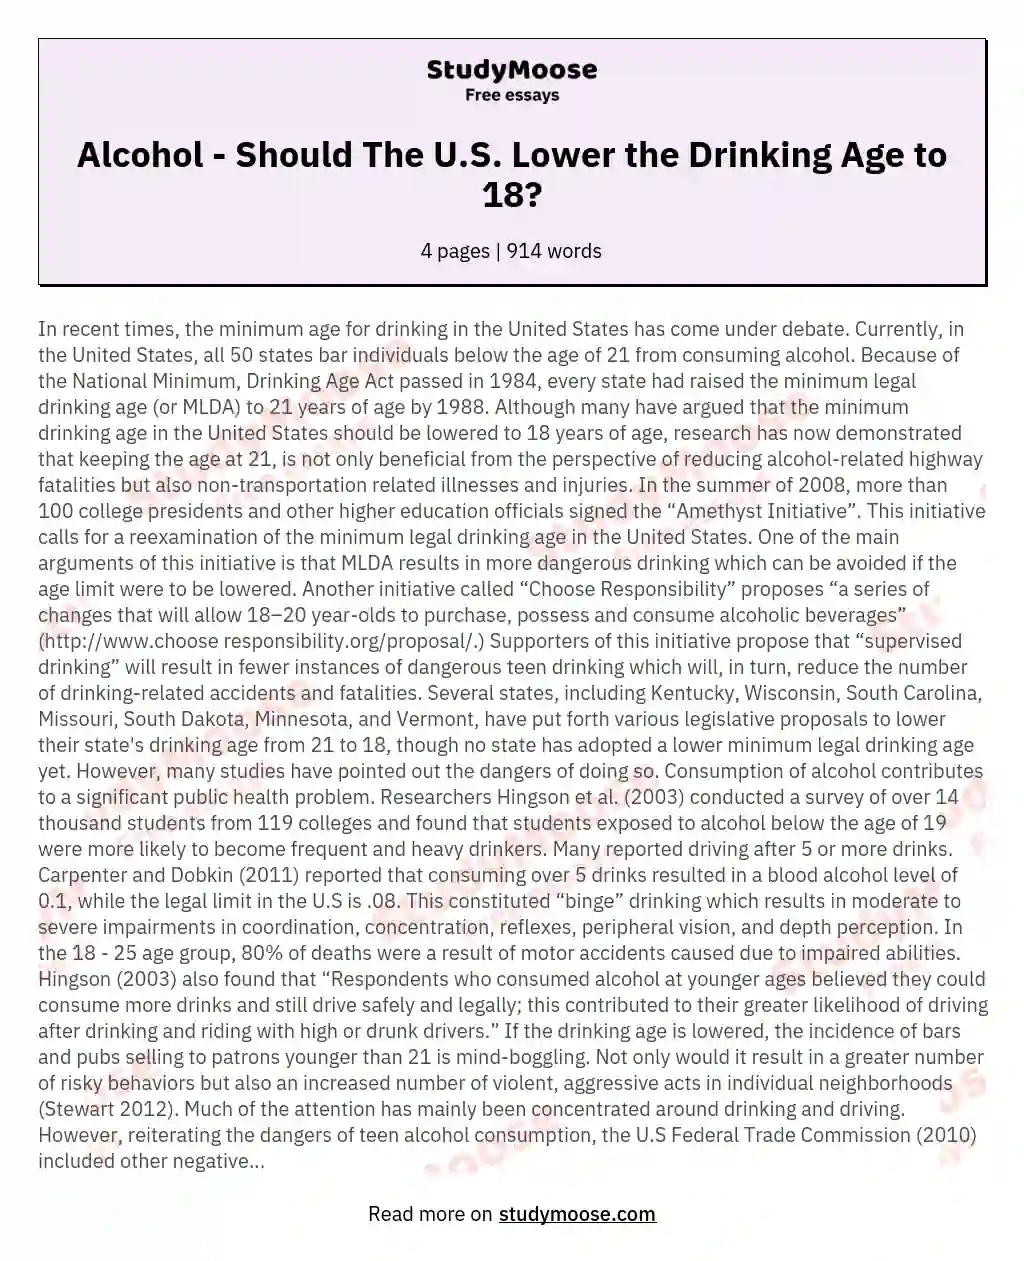 Alcohol - Should The U.S. Lower the Drinking Age to 18?